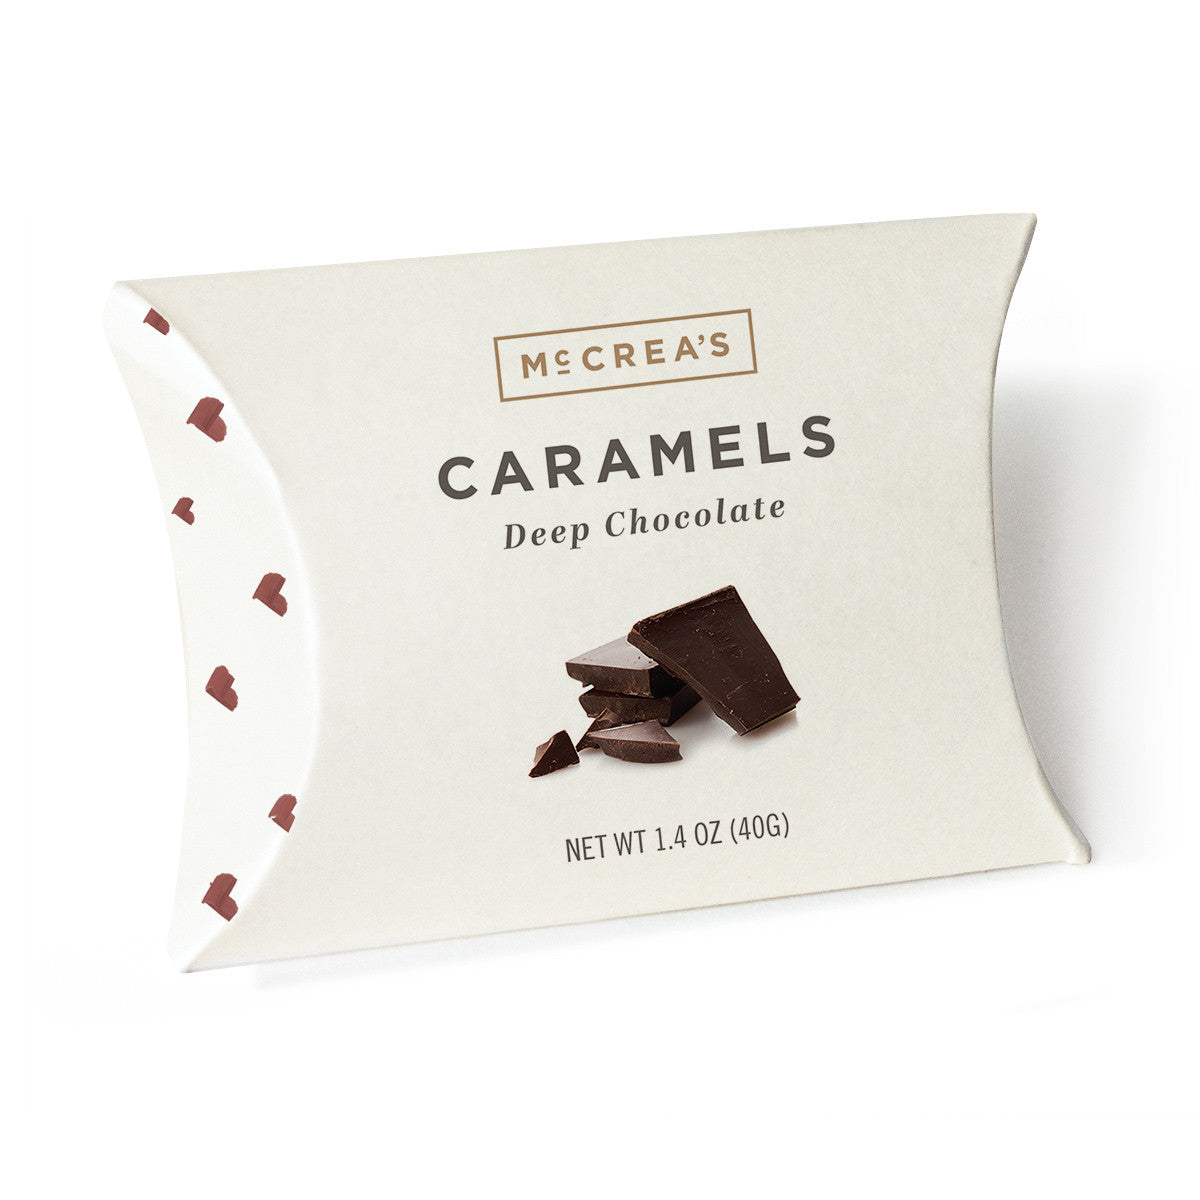 McCrea's Caramels Deep Chocolate Pillow - 5 Pieces - Heart of the Home LV